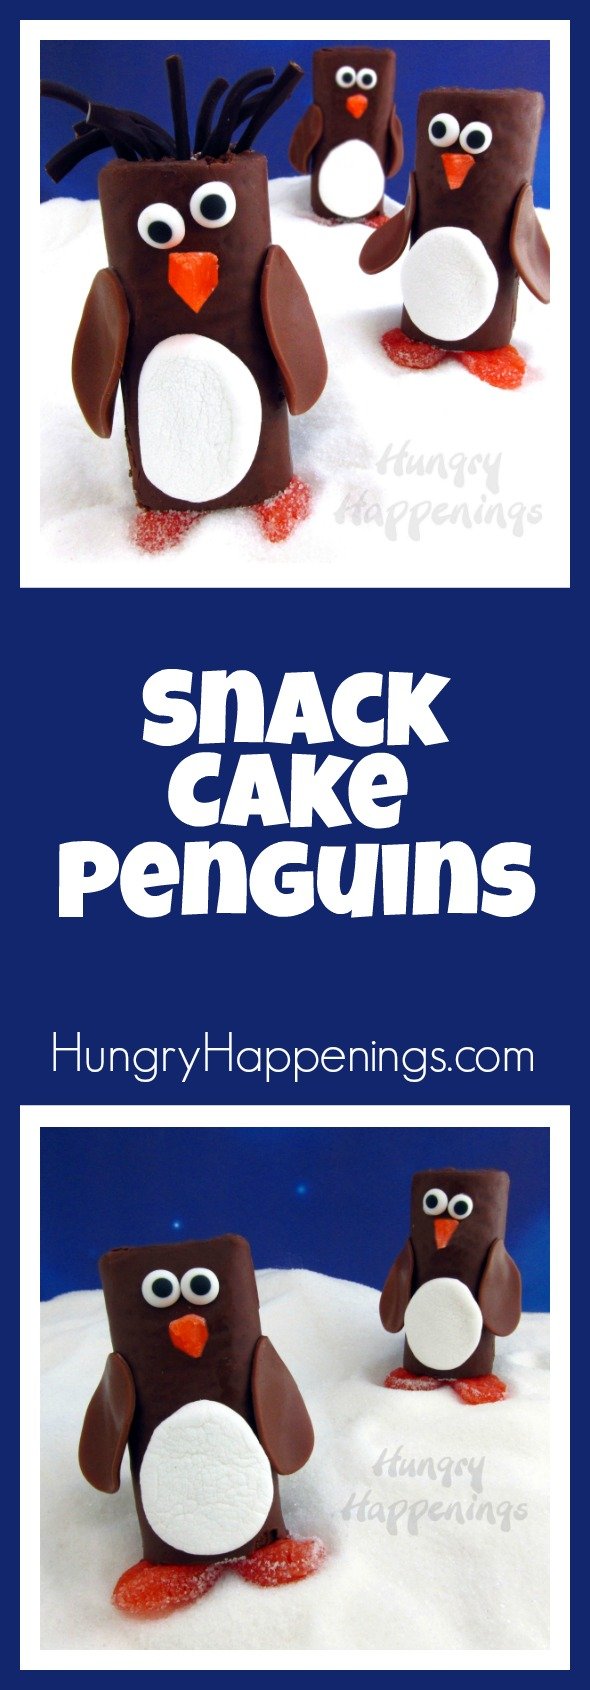 Turn Hostess HoHo's or Little Debbie Swiss Rolls into adorably cute Snack Cake Penguins. They'd make great treats for Christmas, a zoo party, or a wintertime event.